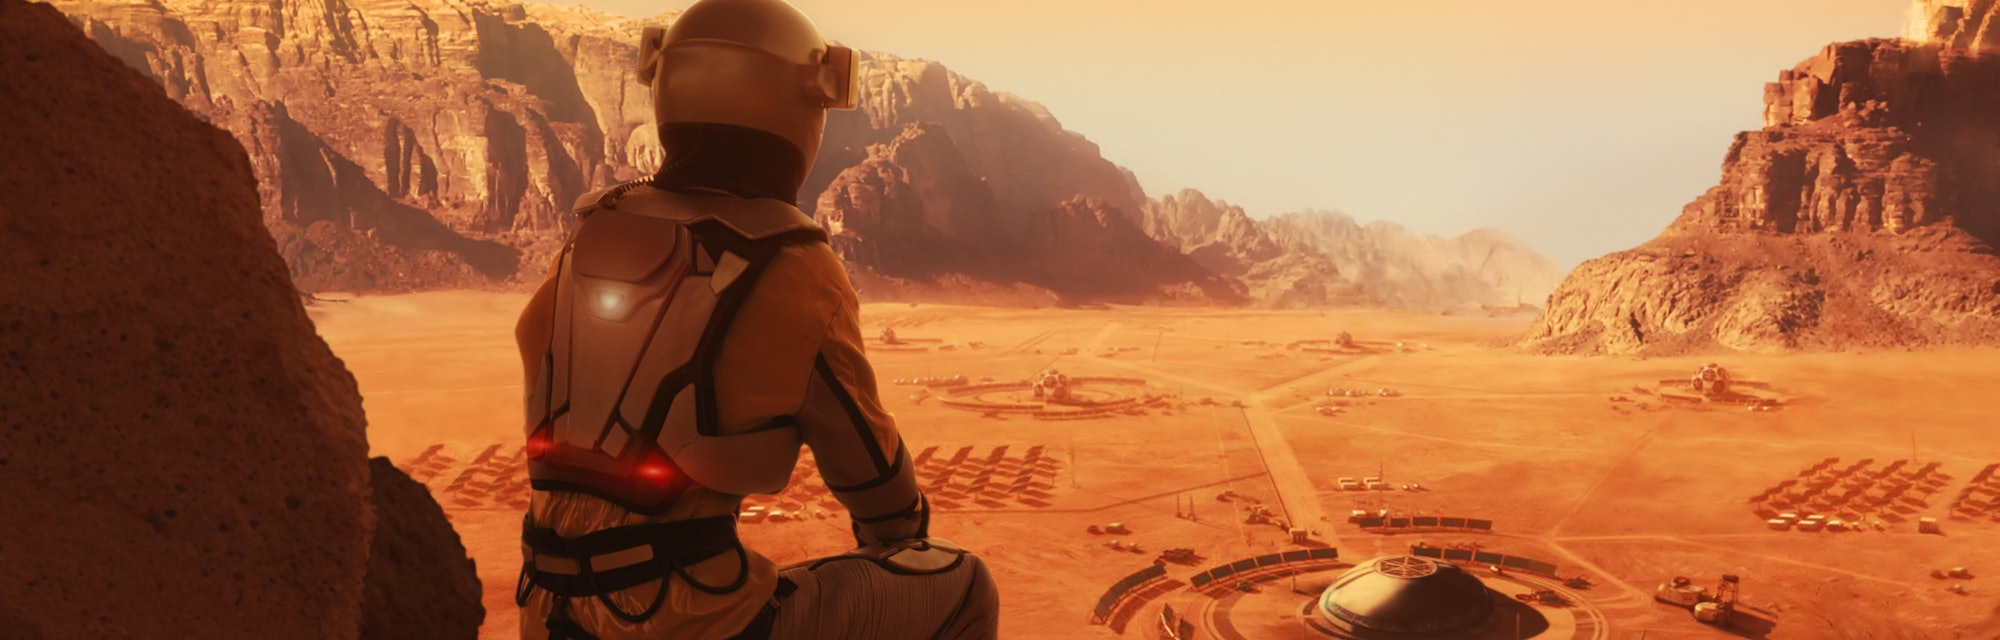 Sitting alone and looking at a Mars space outpost or an alien colony in arid red desert. NASA Public...